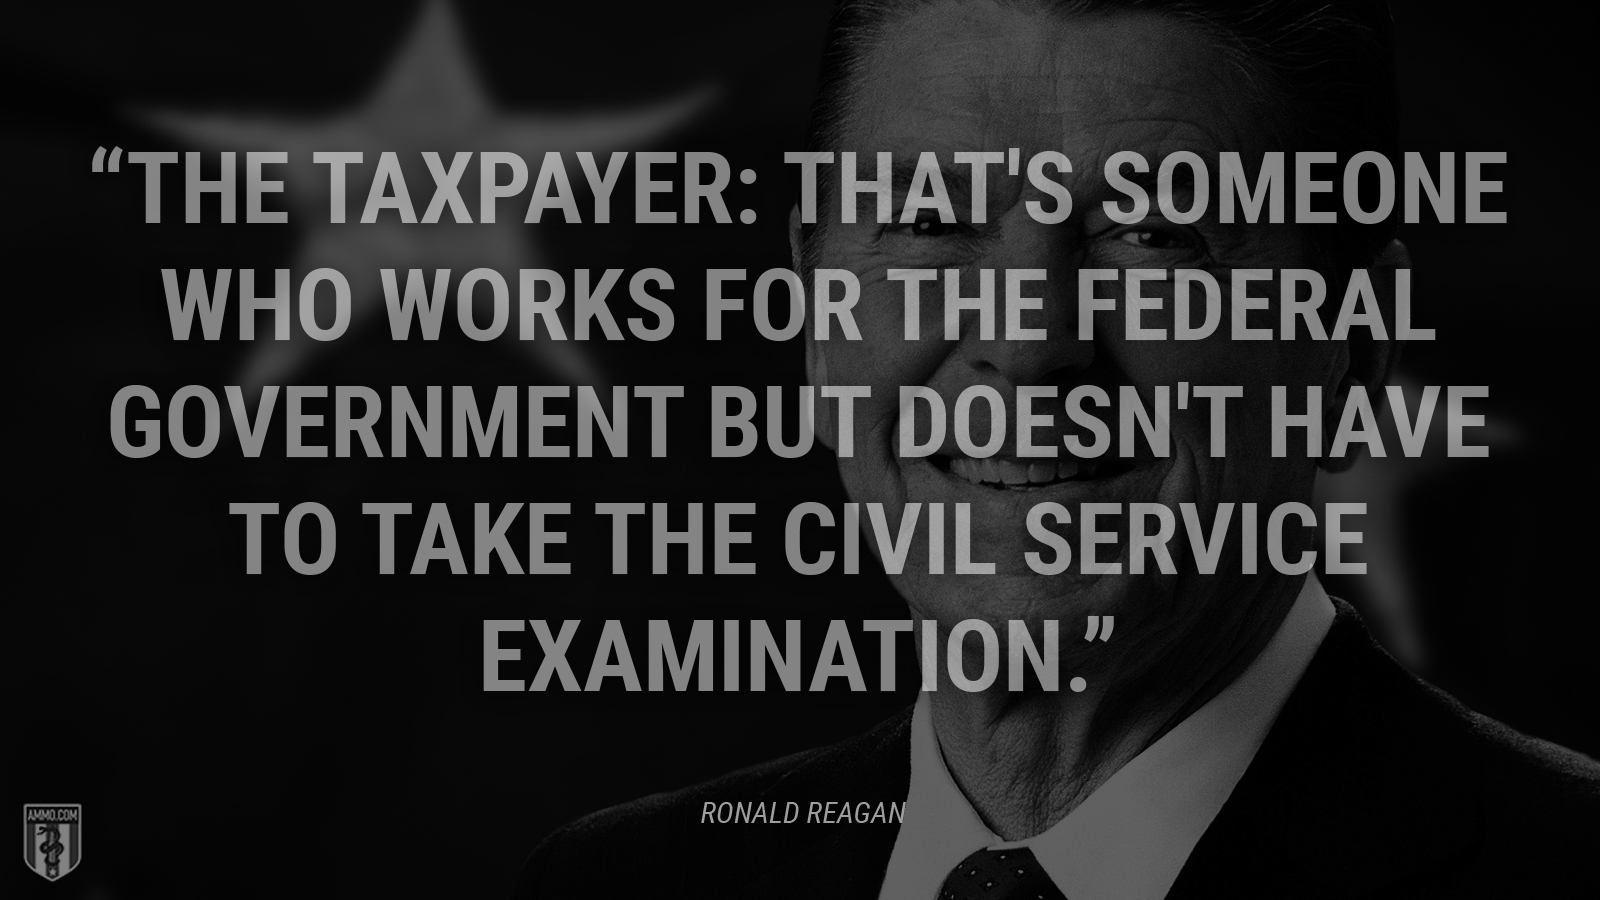 “The taxpayer: That's someone who works for the federal government but doesn't have to take the civil service examination.” - Ronald Reagan